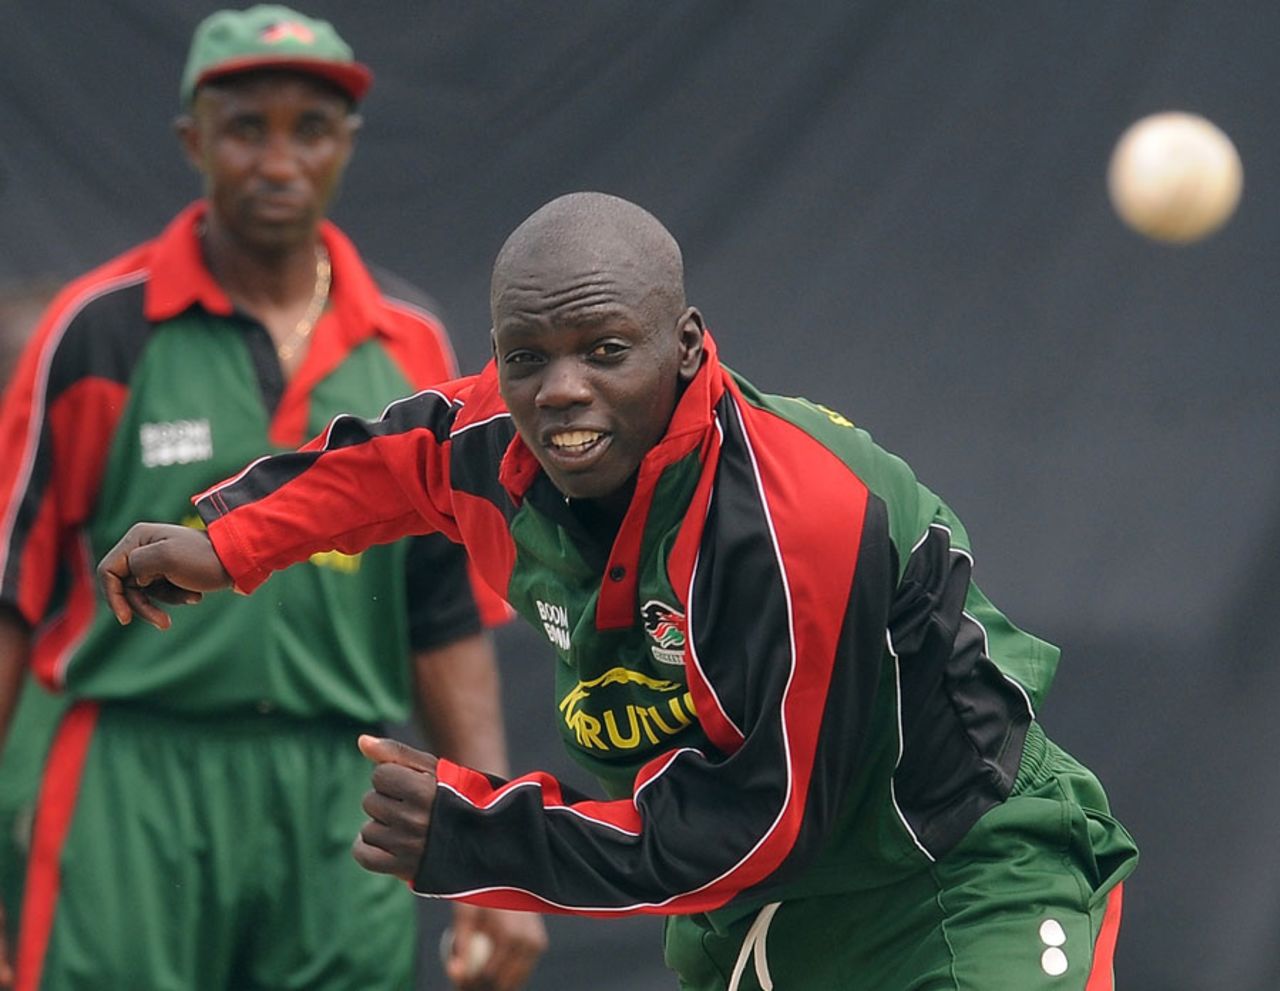 Kenya's Shem Ngoche bowls during a training session at the P Sara Oval, Colombo, February 26, 2011